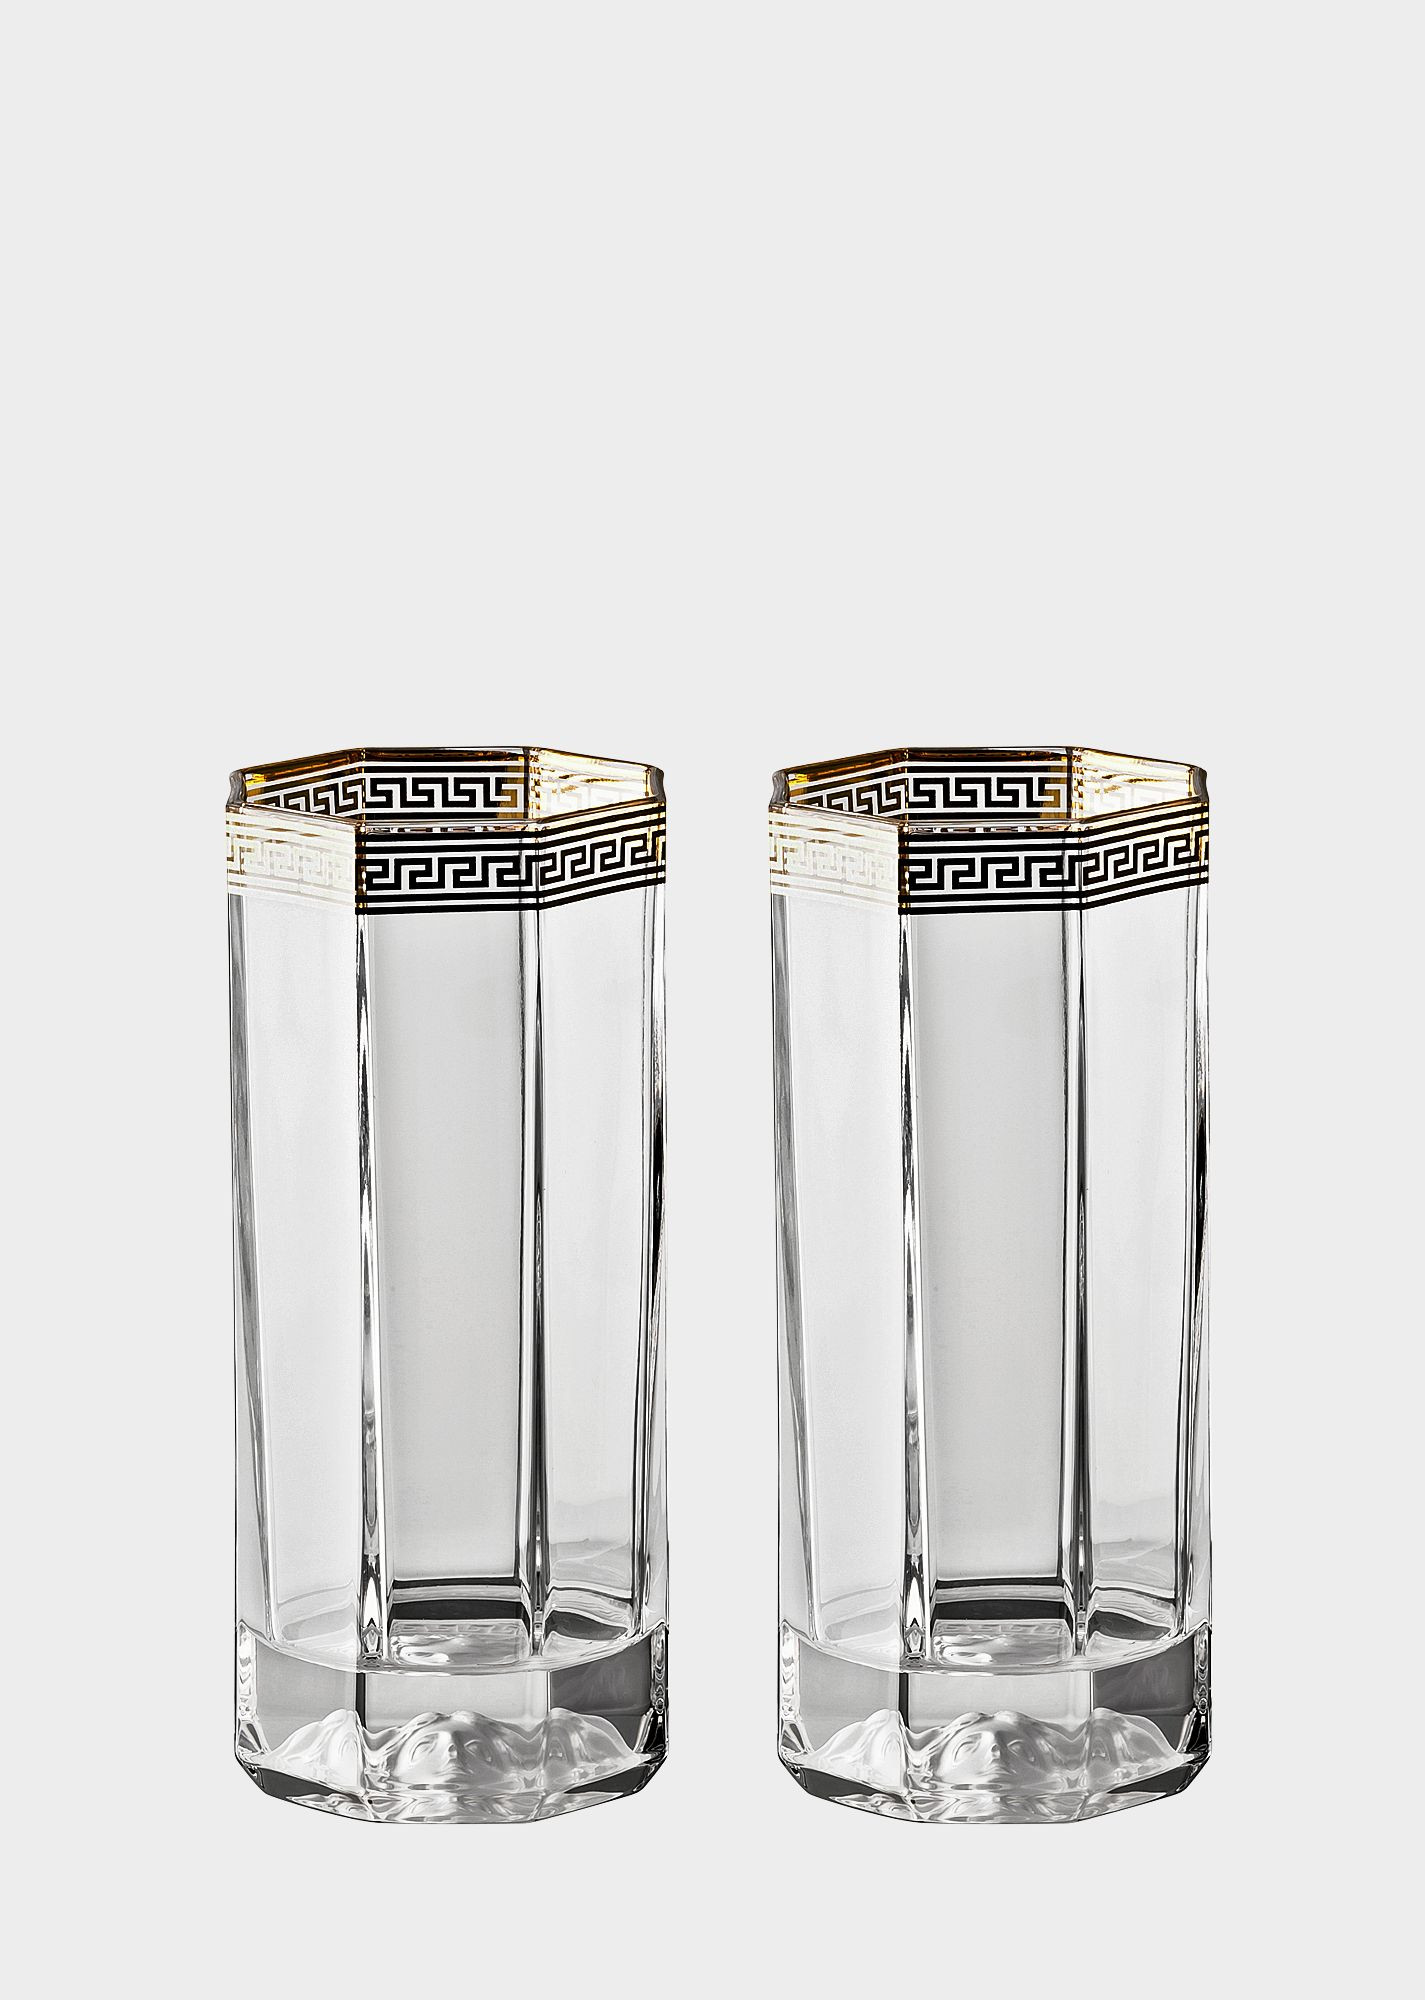 27 Lovable Moser Glass Vase 2024 free download moser glass vase of 21 crystal glass vase the weekly world with regard to versace home luxury glass crystal